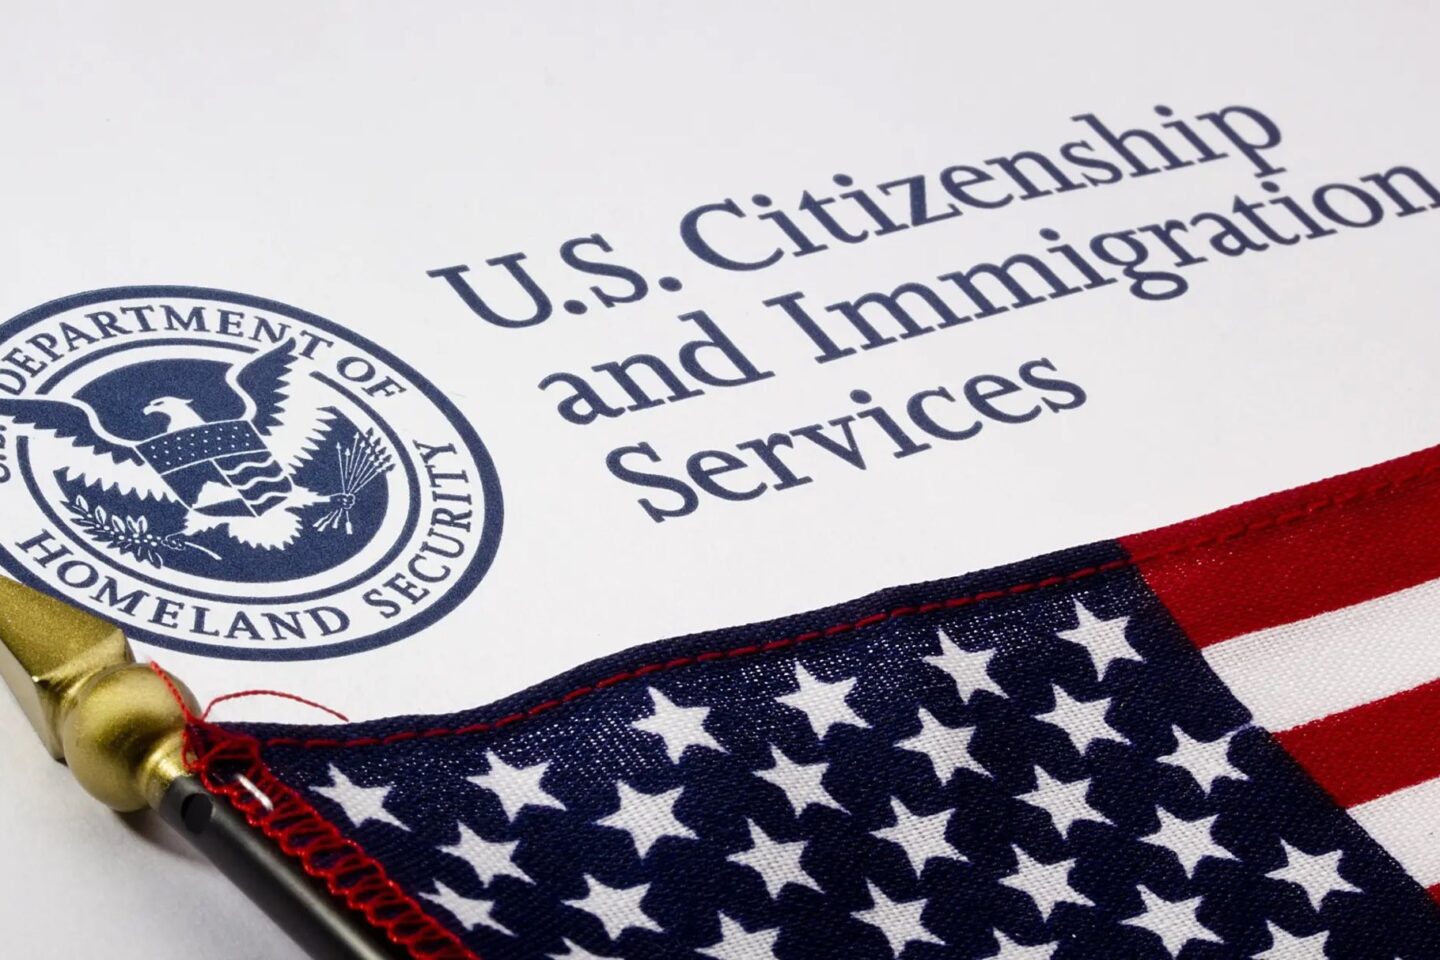 everything-you-need-to-know-about-the-increase-in-immigration-fees-in-the-united-states